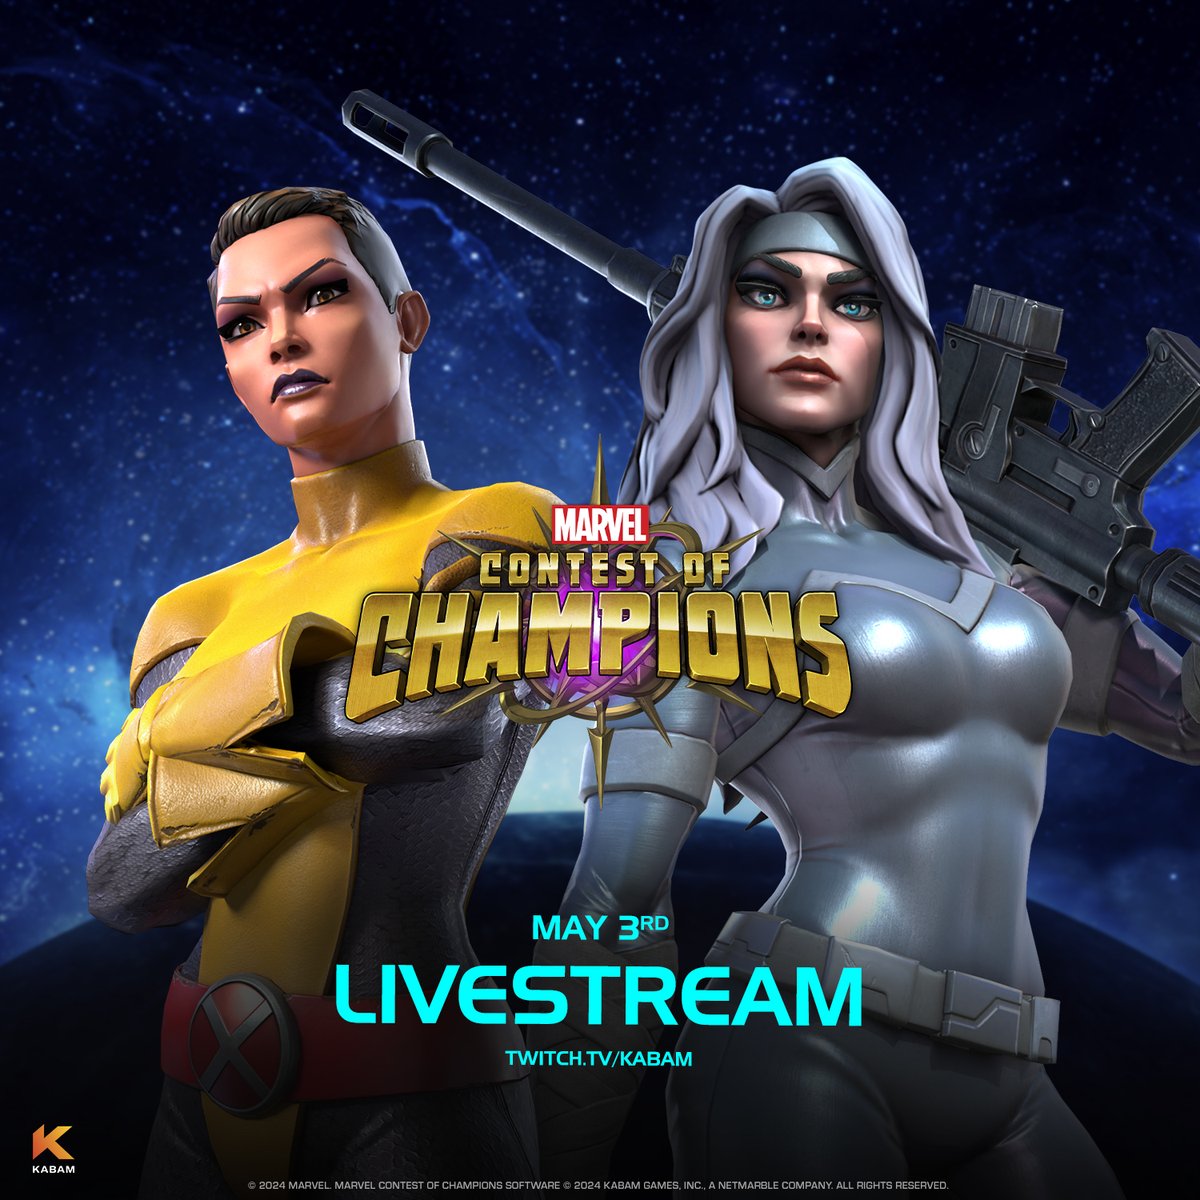 Join us LIVE May 3rd at 9am PT at twitch.tv/Kabam for a first look at SHATHRA! We'll also be discussing May's content and Champions, showcasing new progress opportunities and giving away 7-Star Champions! See you there!